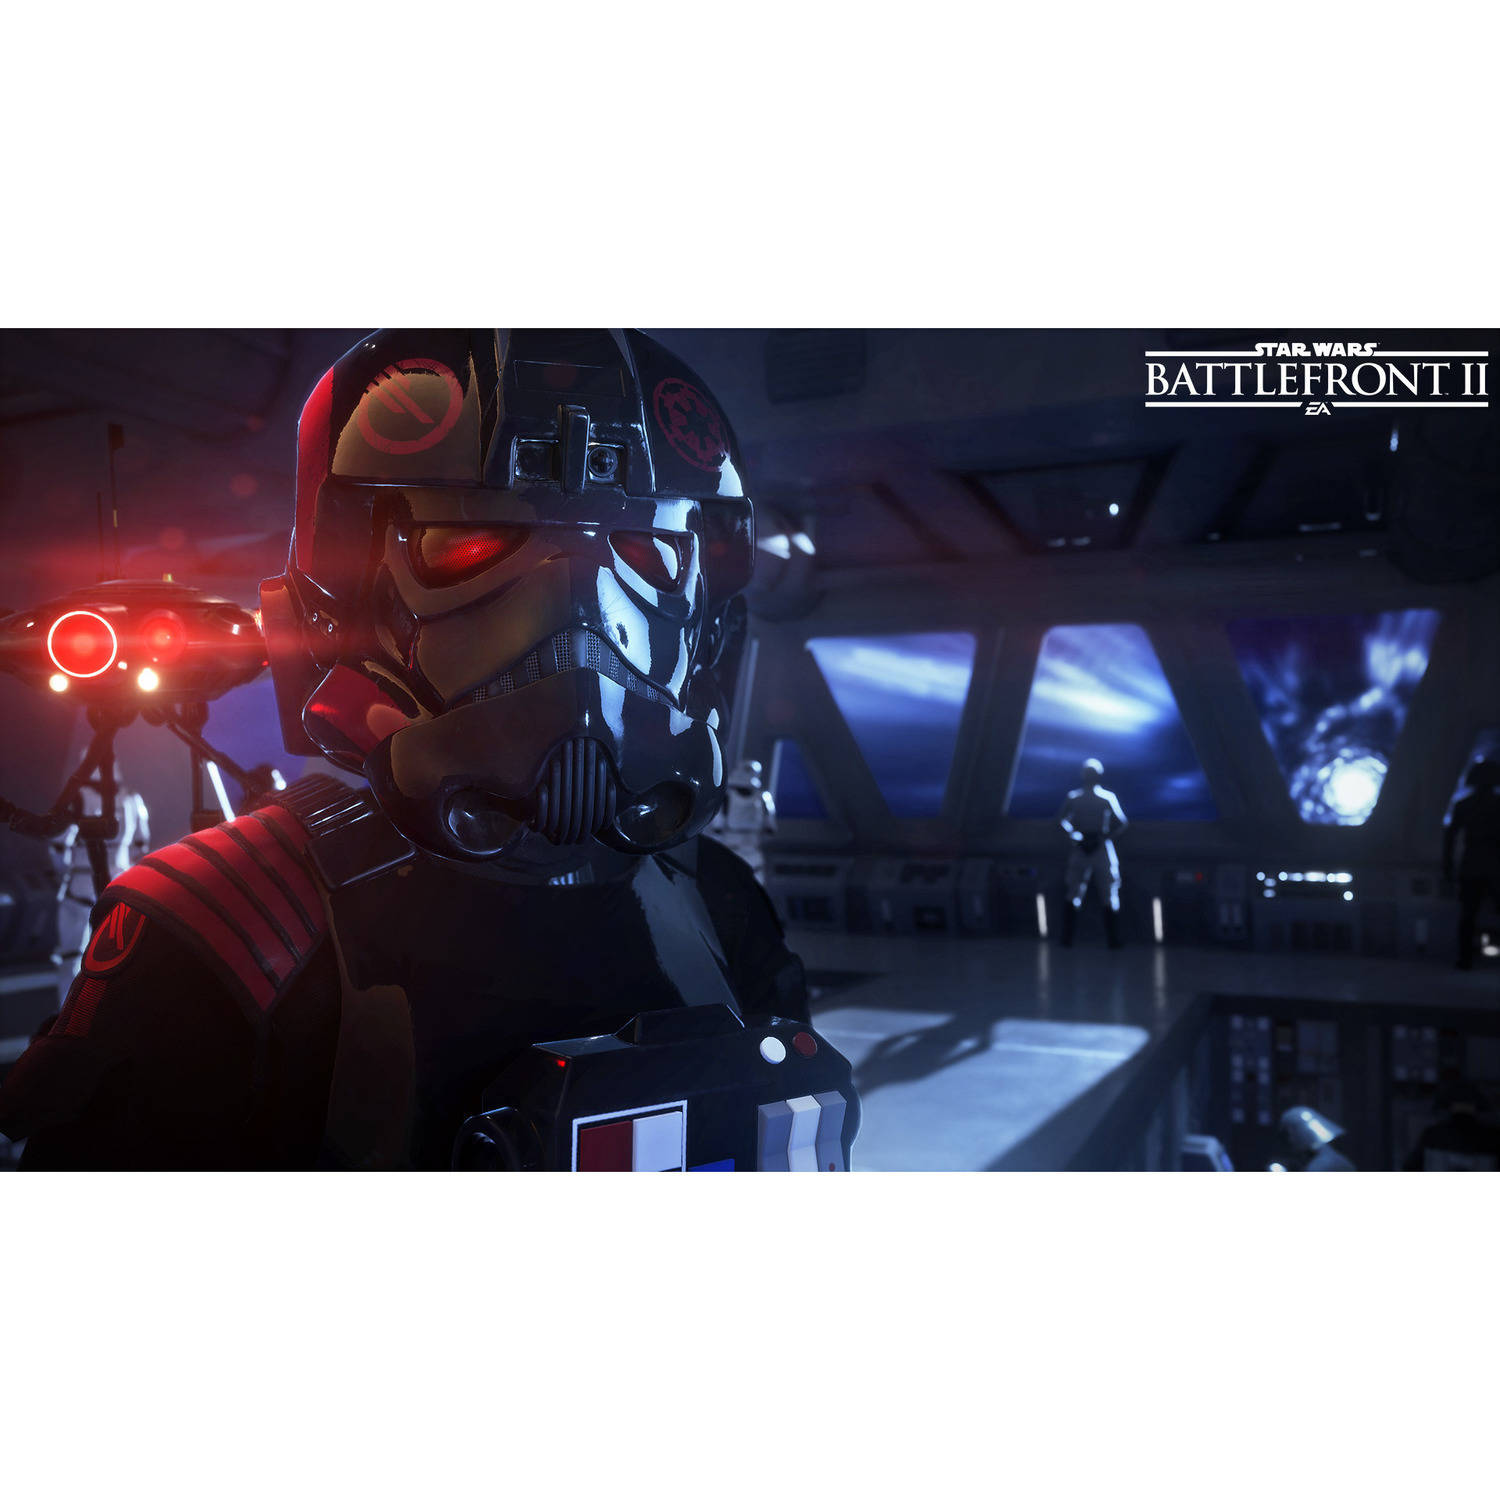 Star Wars Battlefront 2, Electronic Arts, Xbox One, [Physical], 014633735321 - image 3 of 4